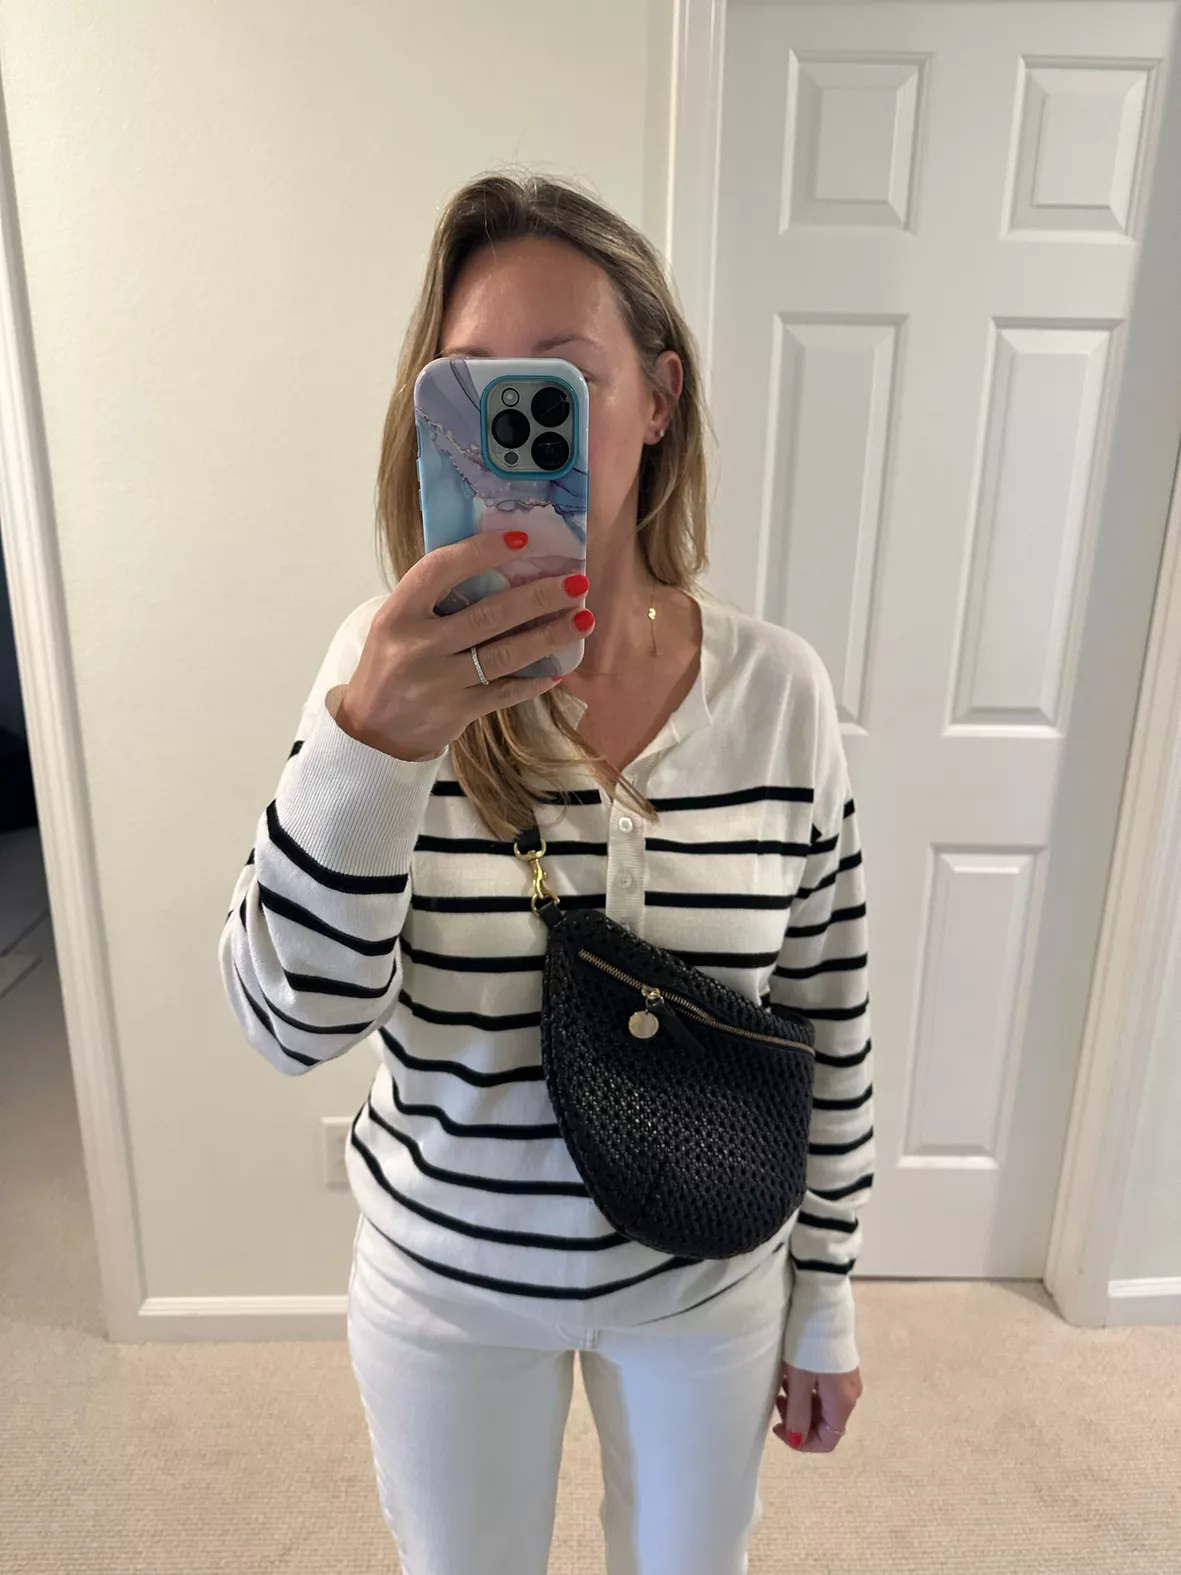 The Perfect Transitional Crossbody Bag